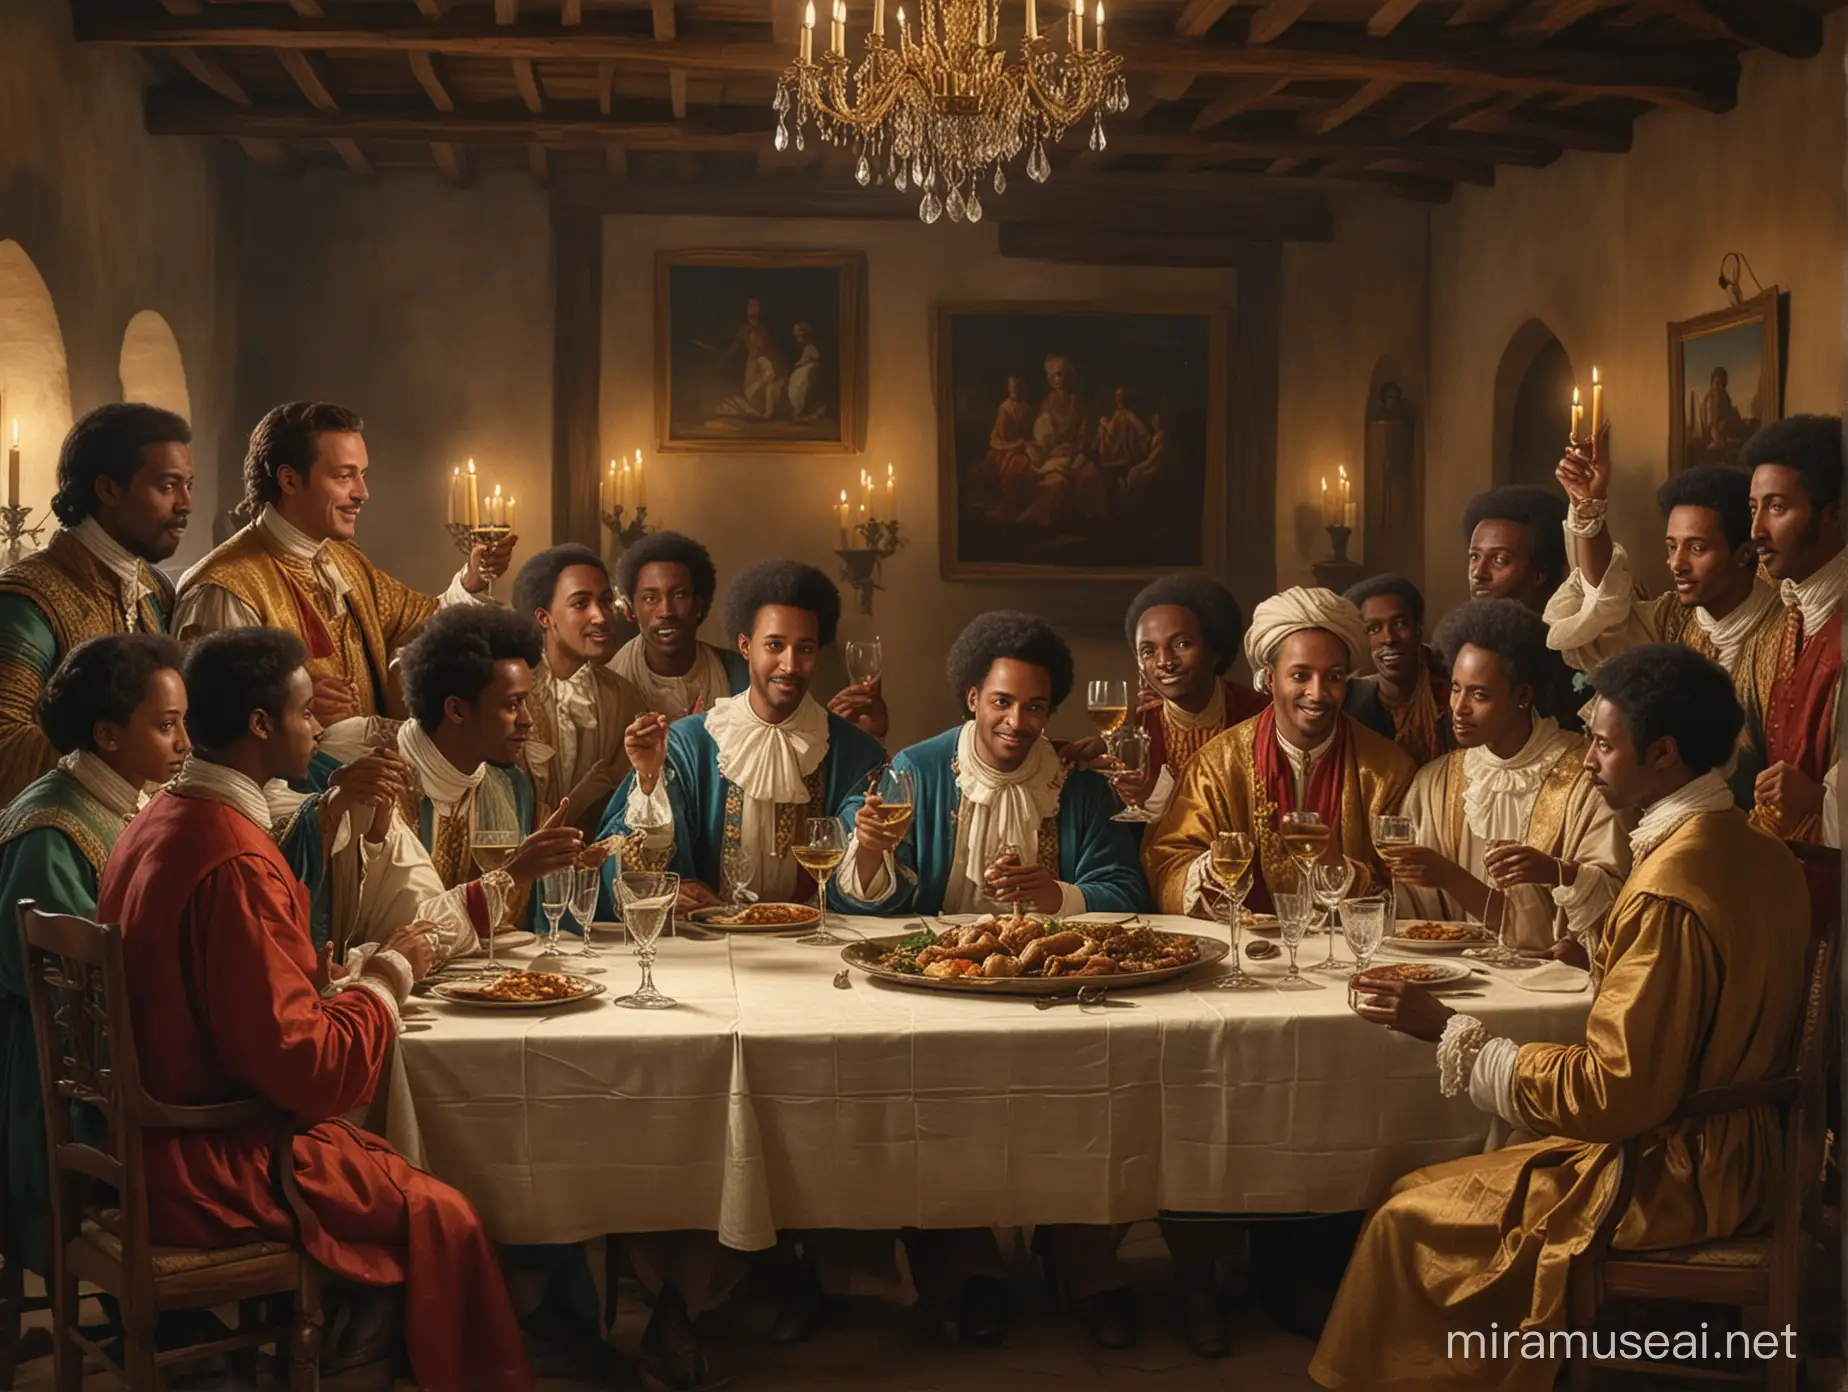 1700's painting style, elegant dinner scene, Italian and Ethiopian representatives sitting at a table, clinking glasses, Wuchale Treaty parchment glowing in the background.